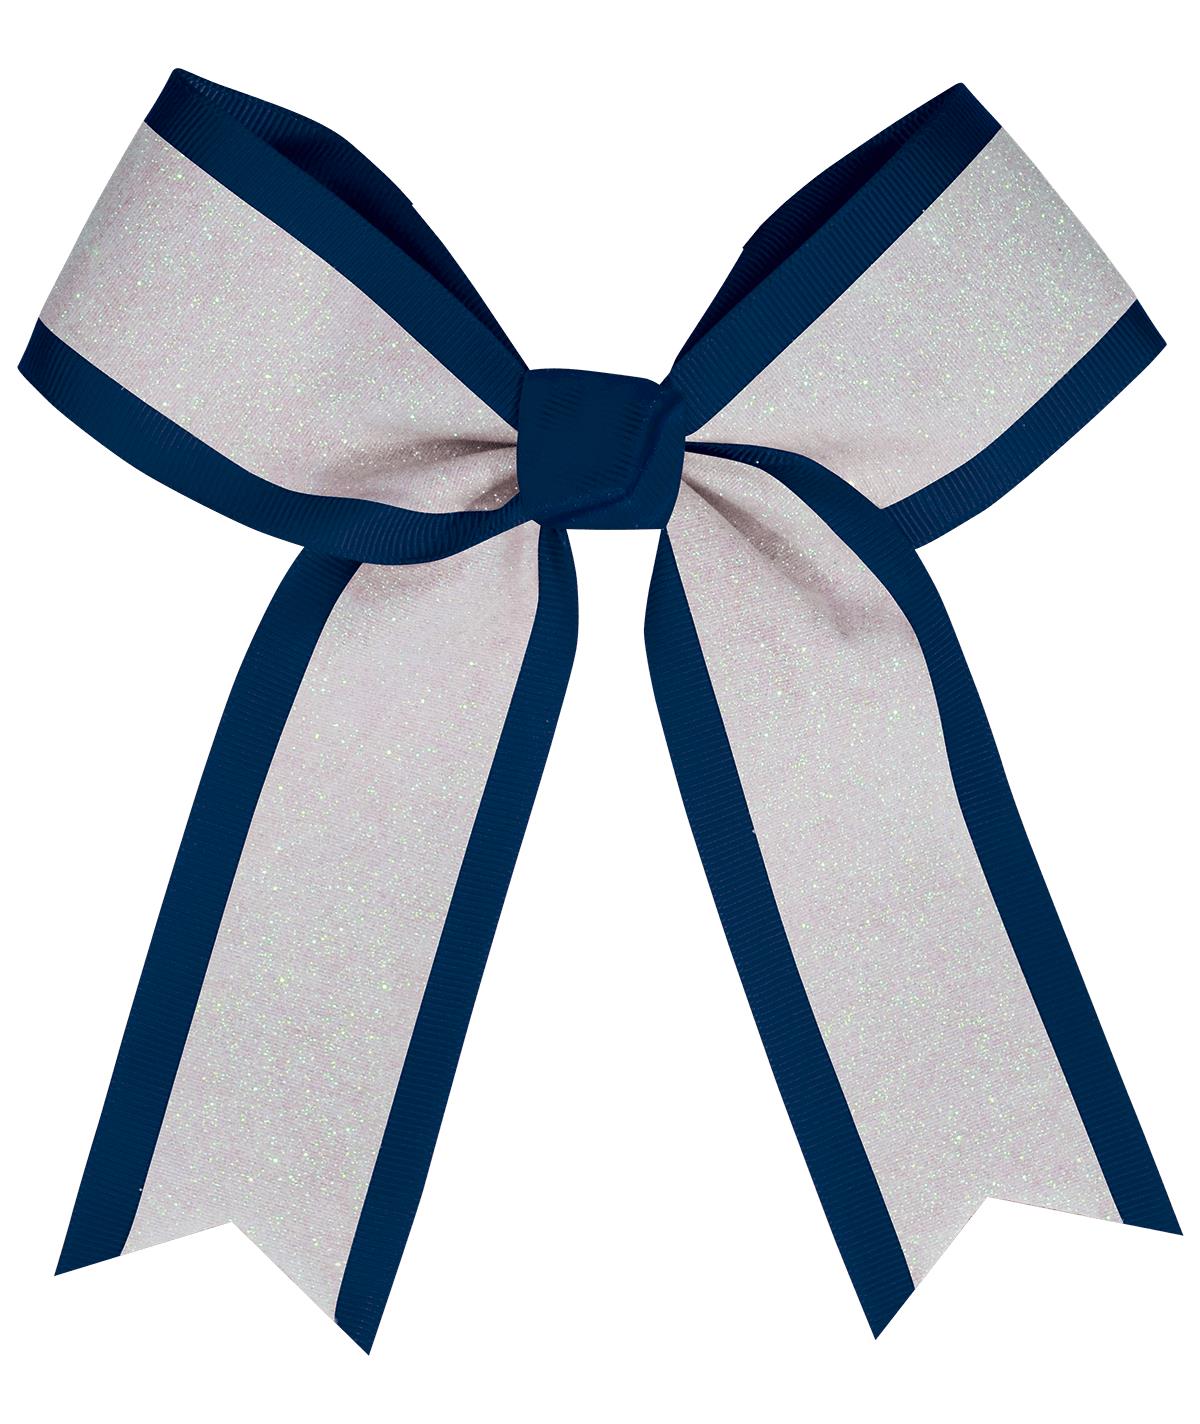 My Cheer Bow Wears a Cheer Bow Large Blue Mystique Hair Bow 